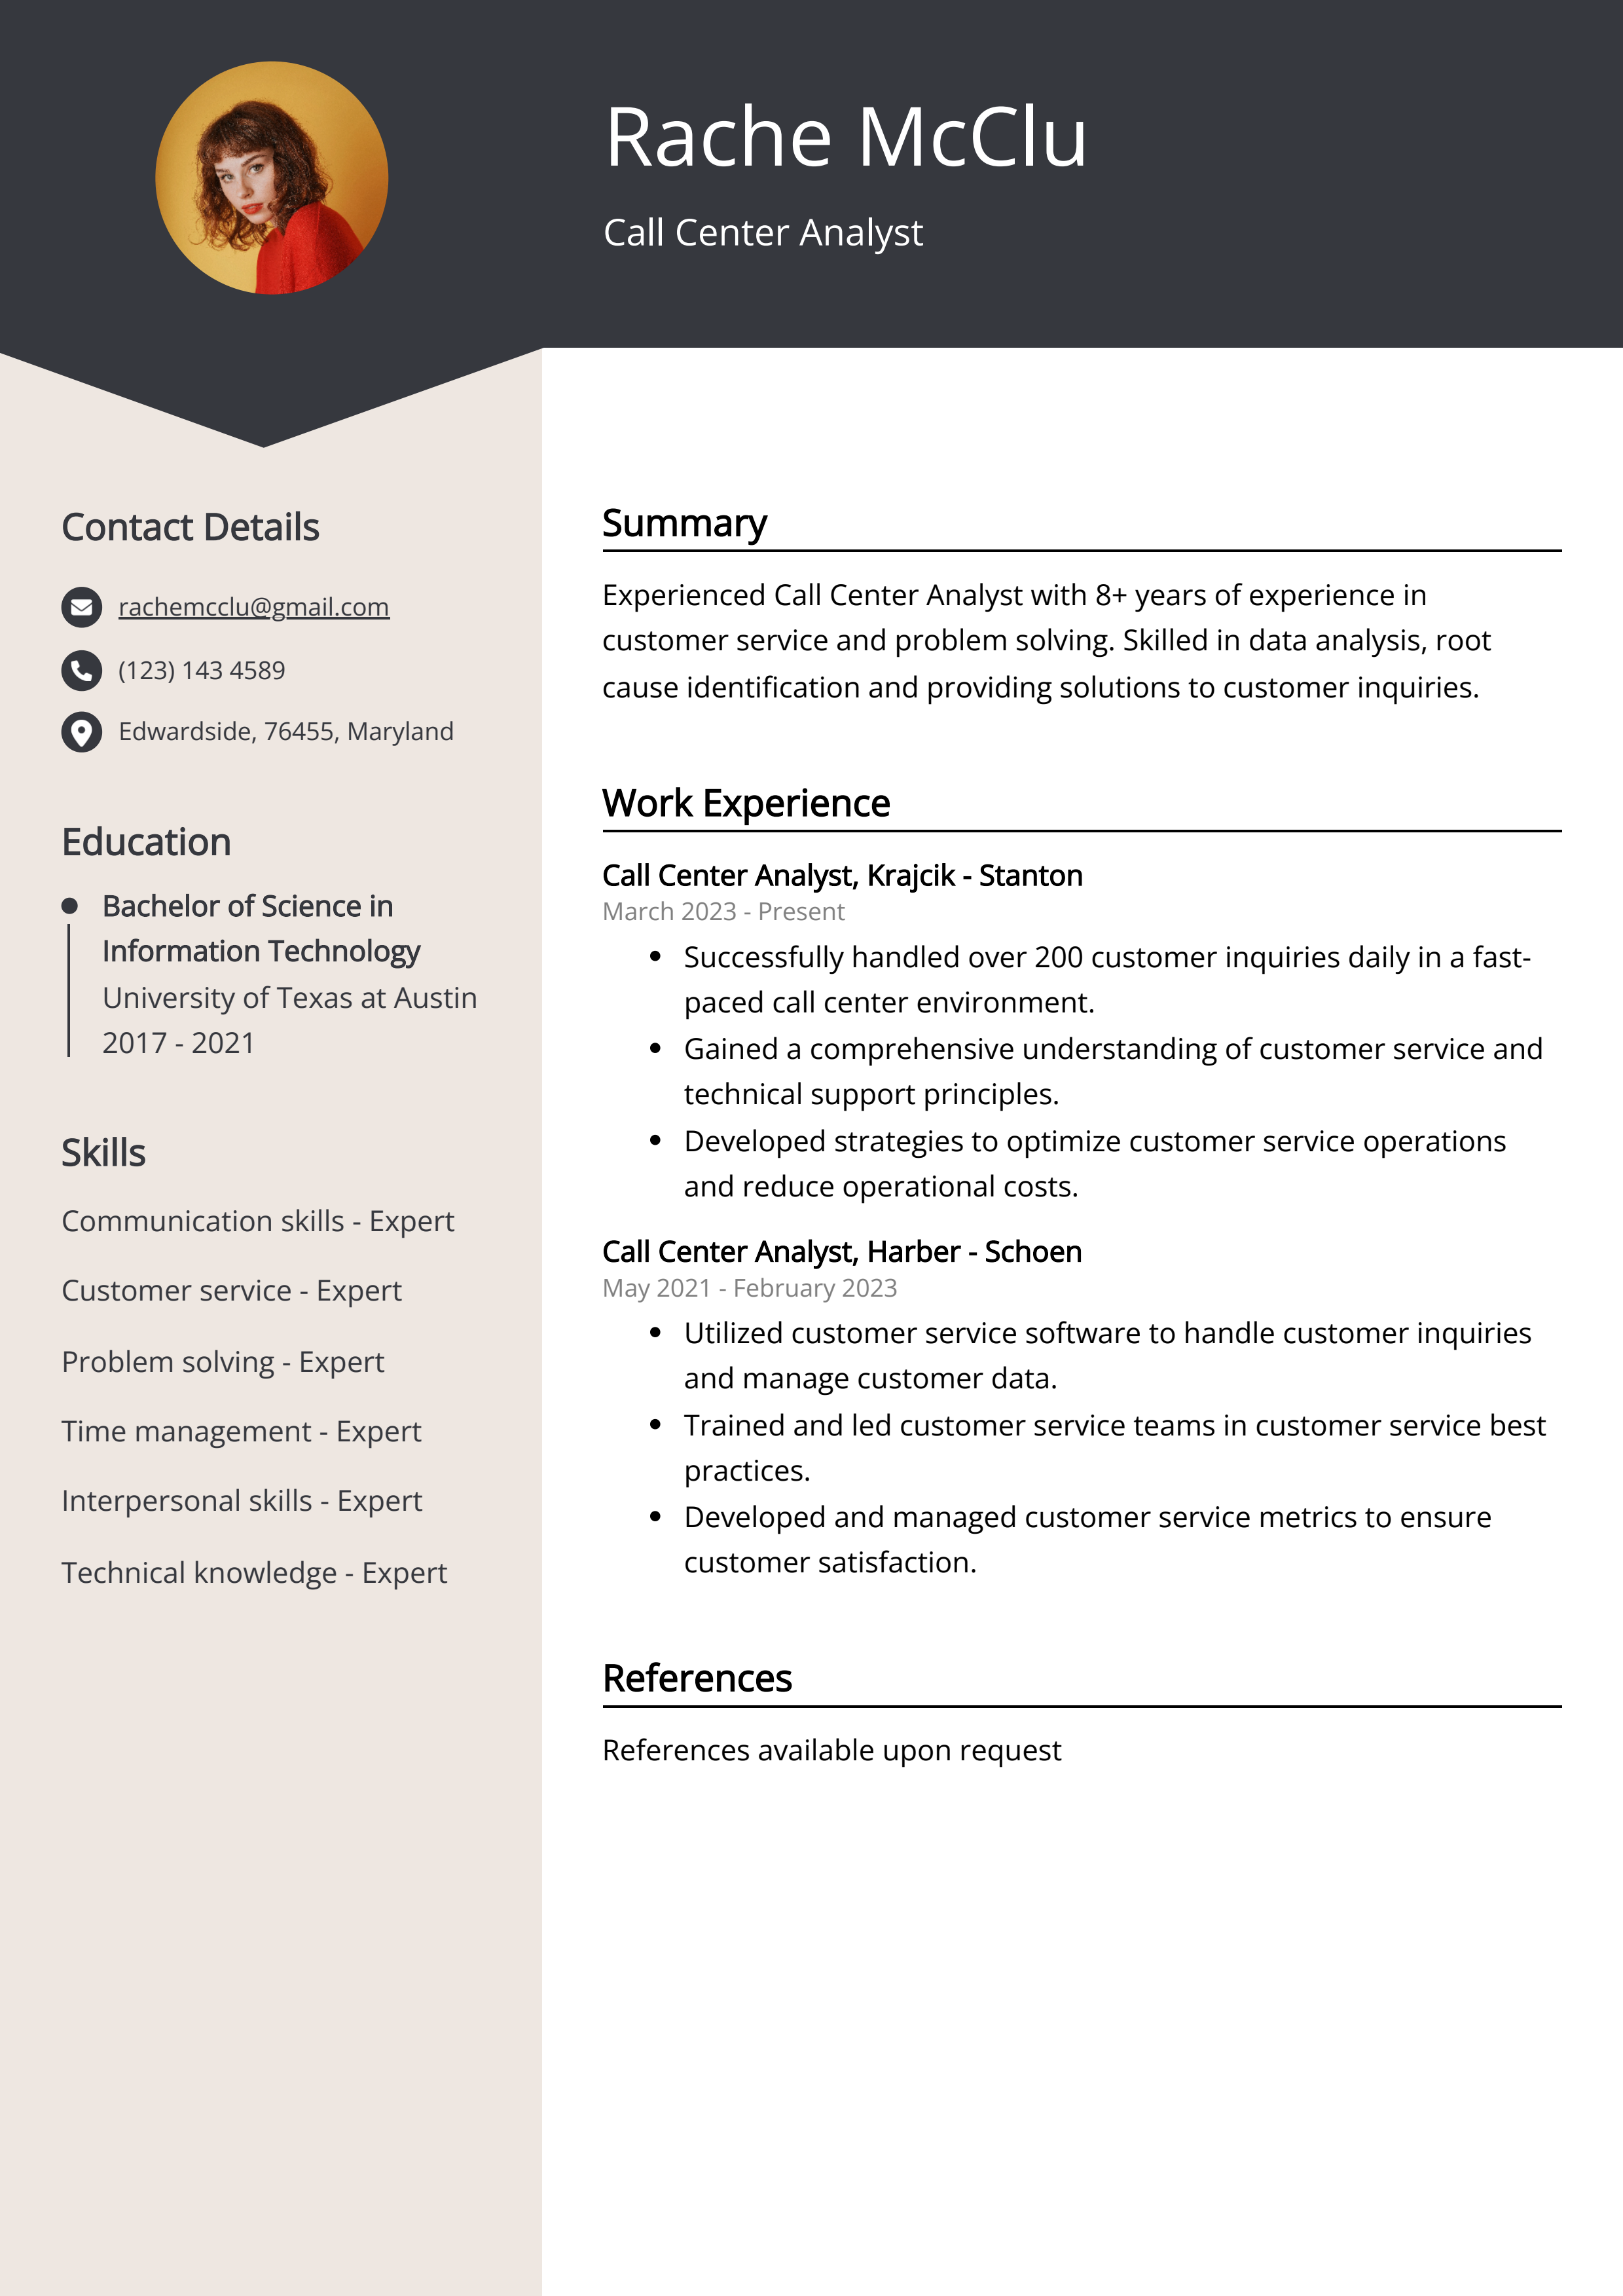 Call Center Analyst Resume Example